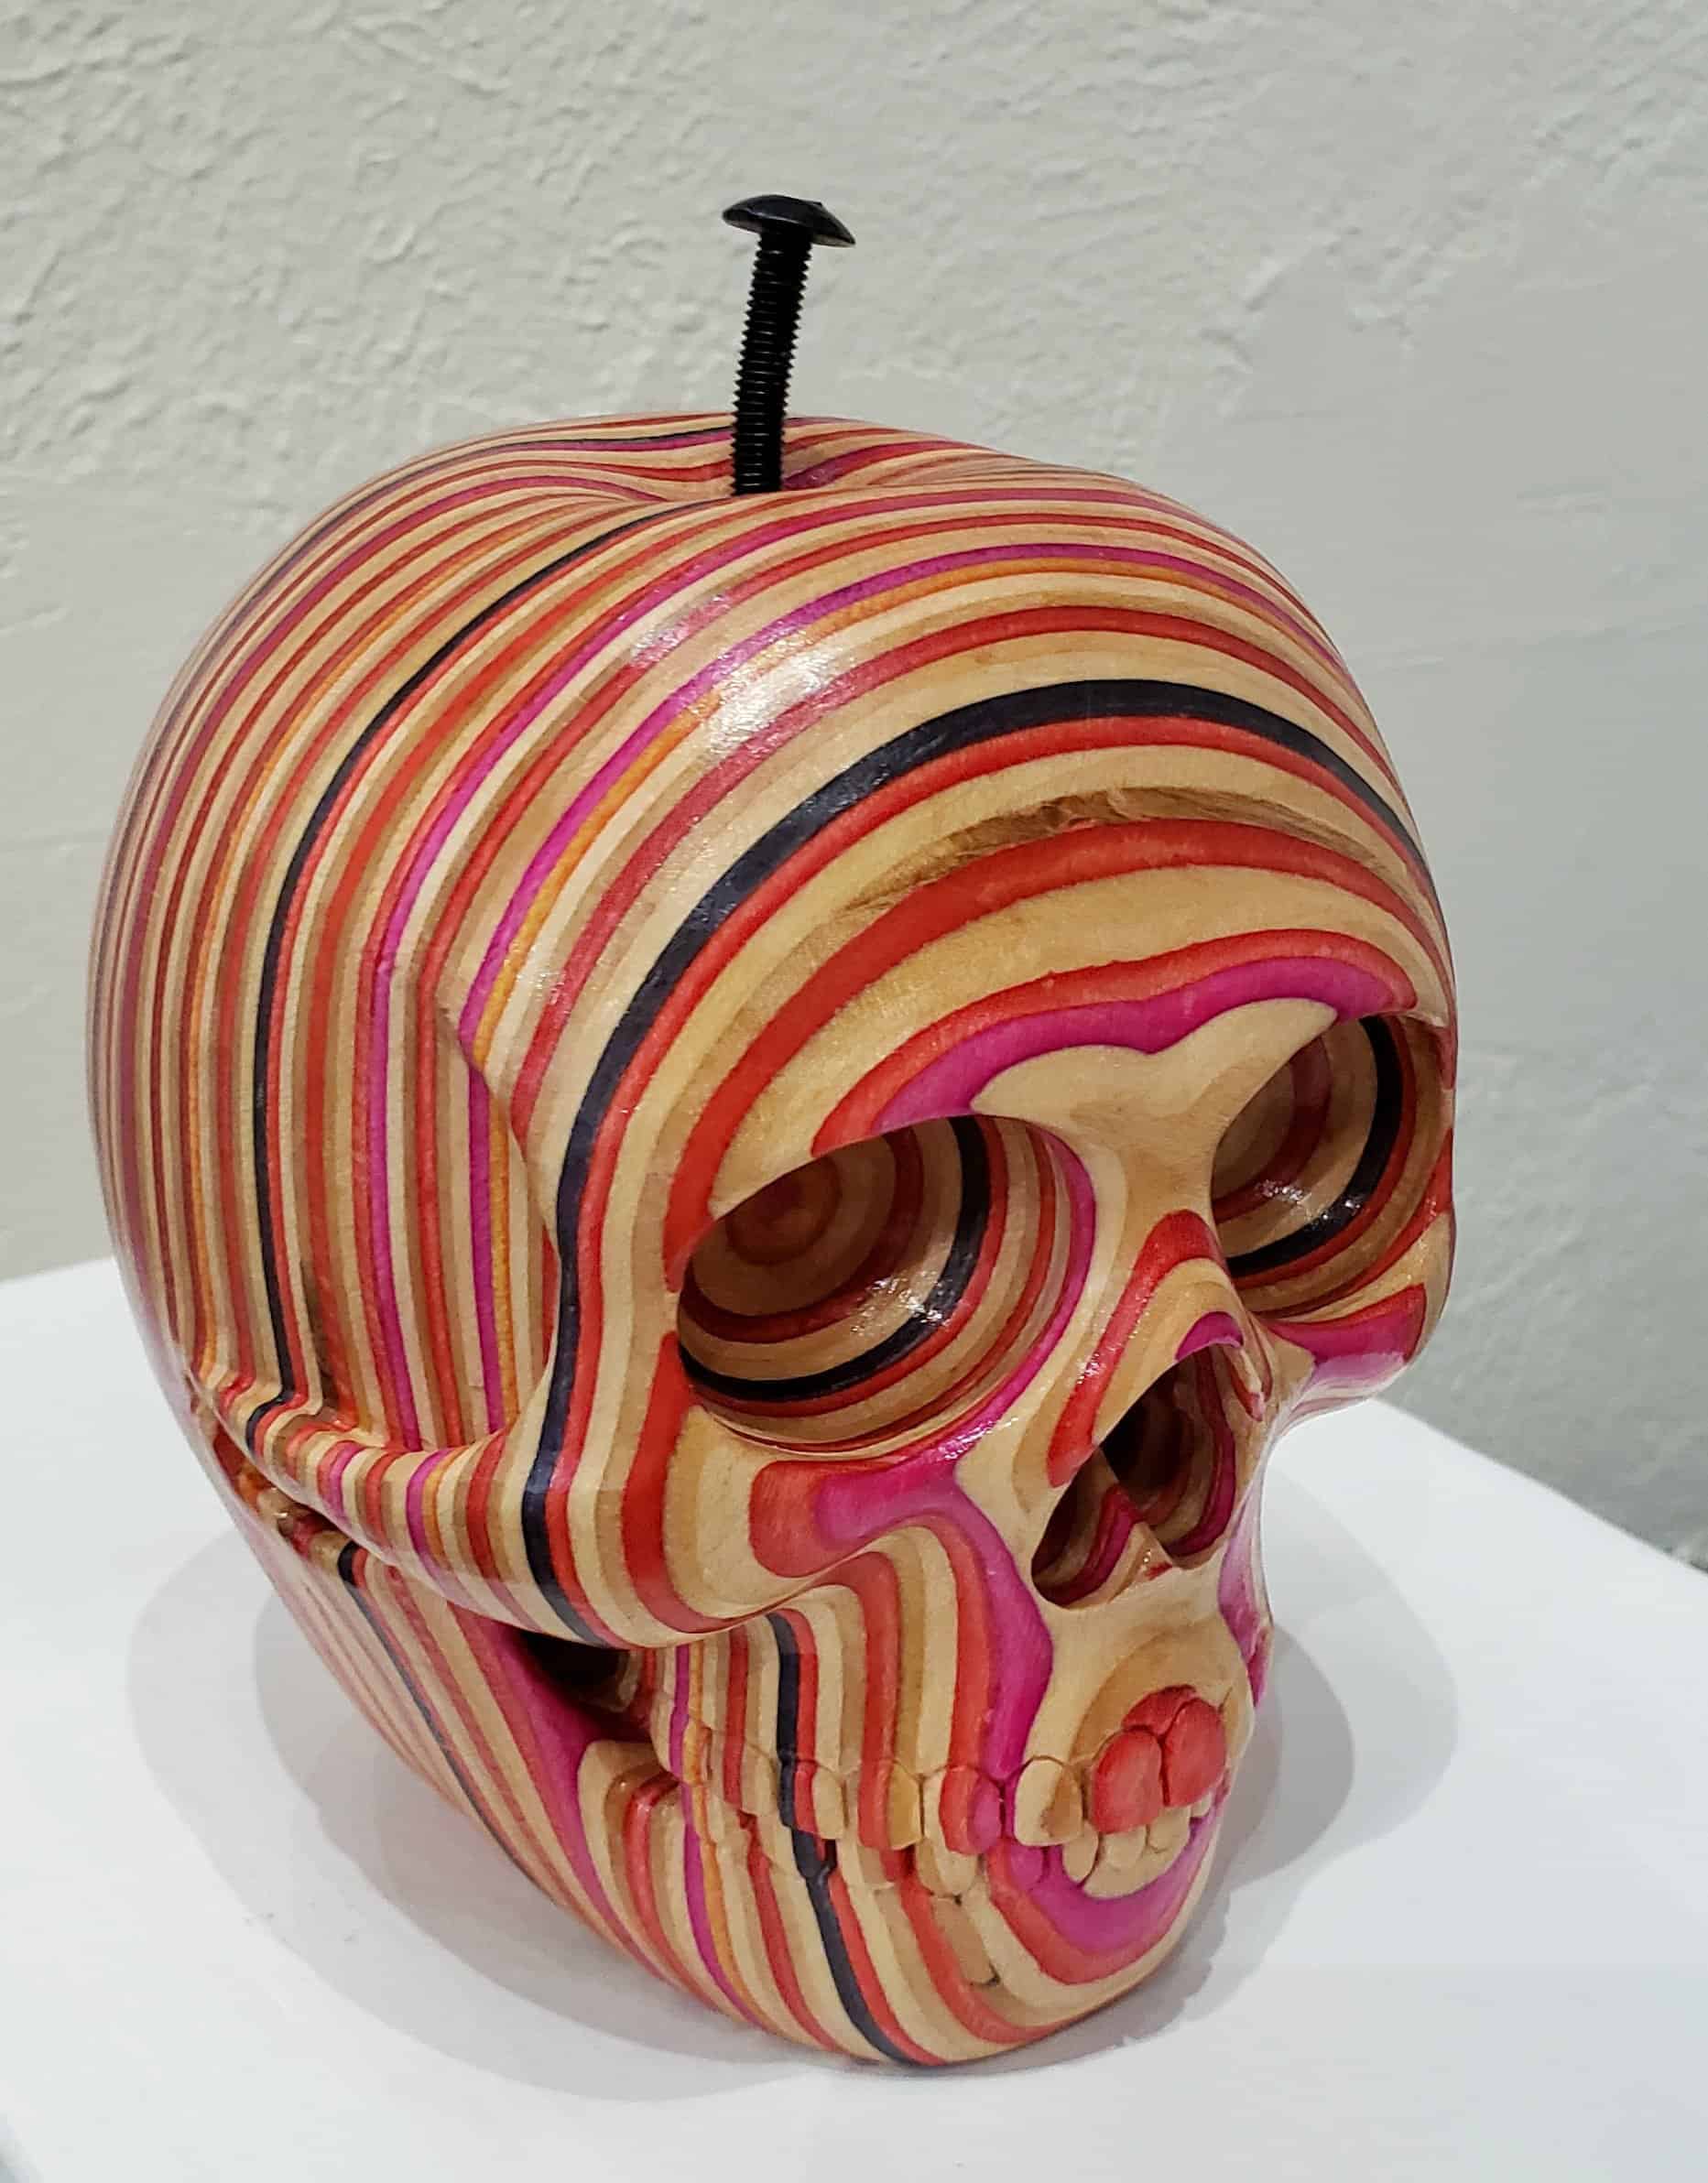 Isreal Forbes, Bad Apples, Wood, 2022